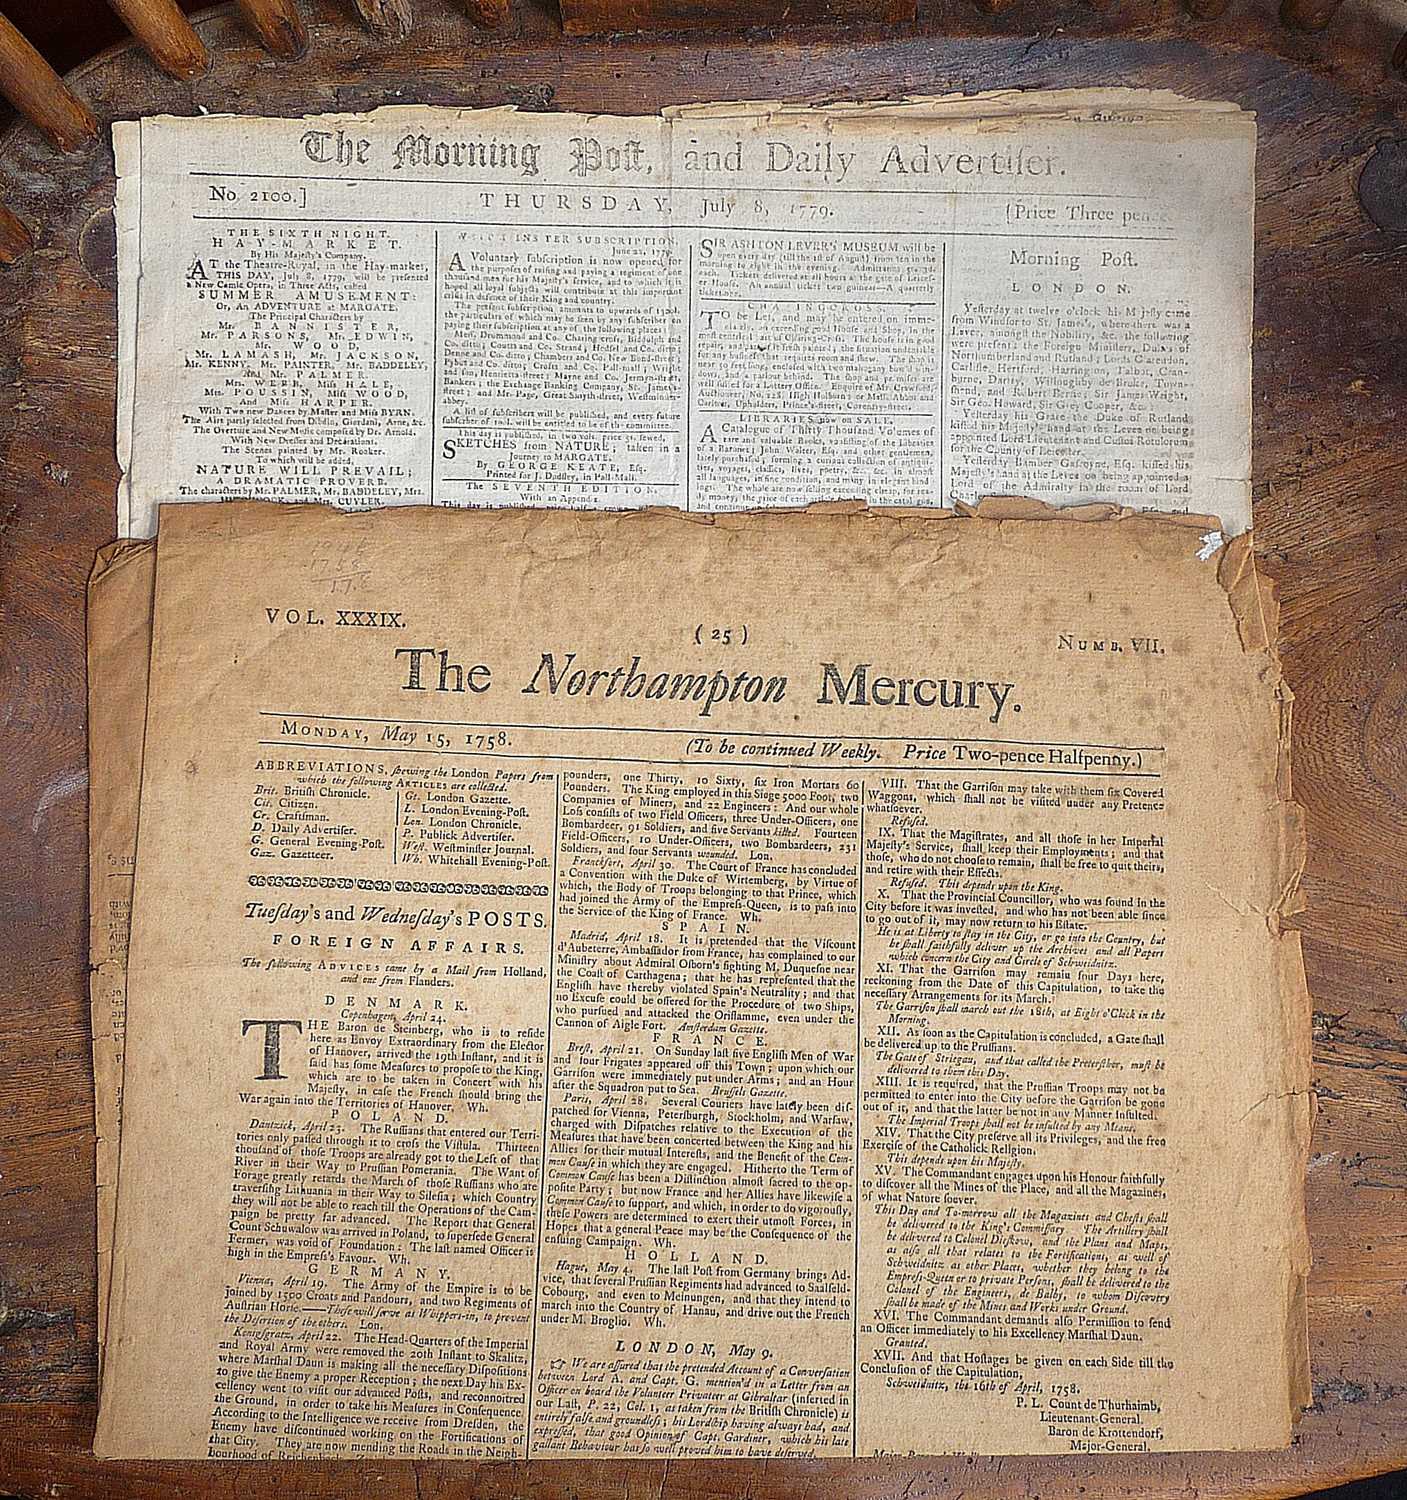 1758 issue of The Northampton Mercury newspaper and a 1779 Morning Post and Advertiser